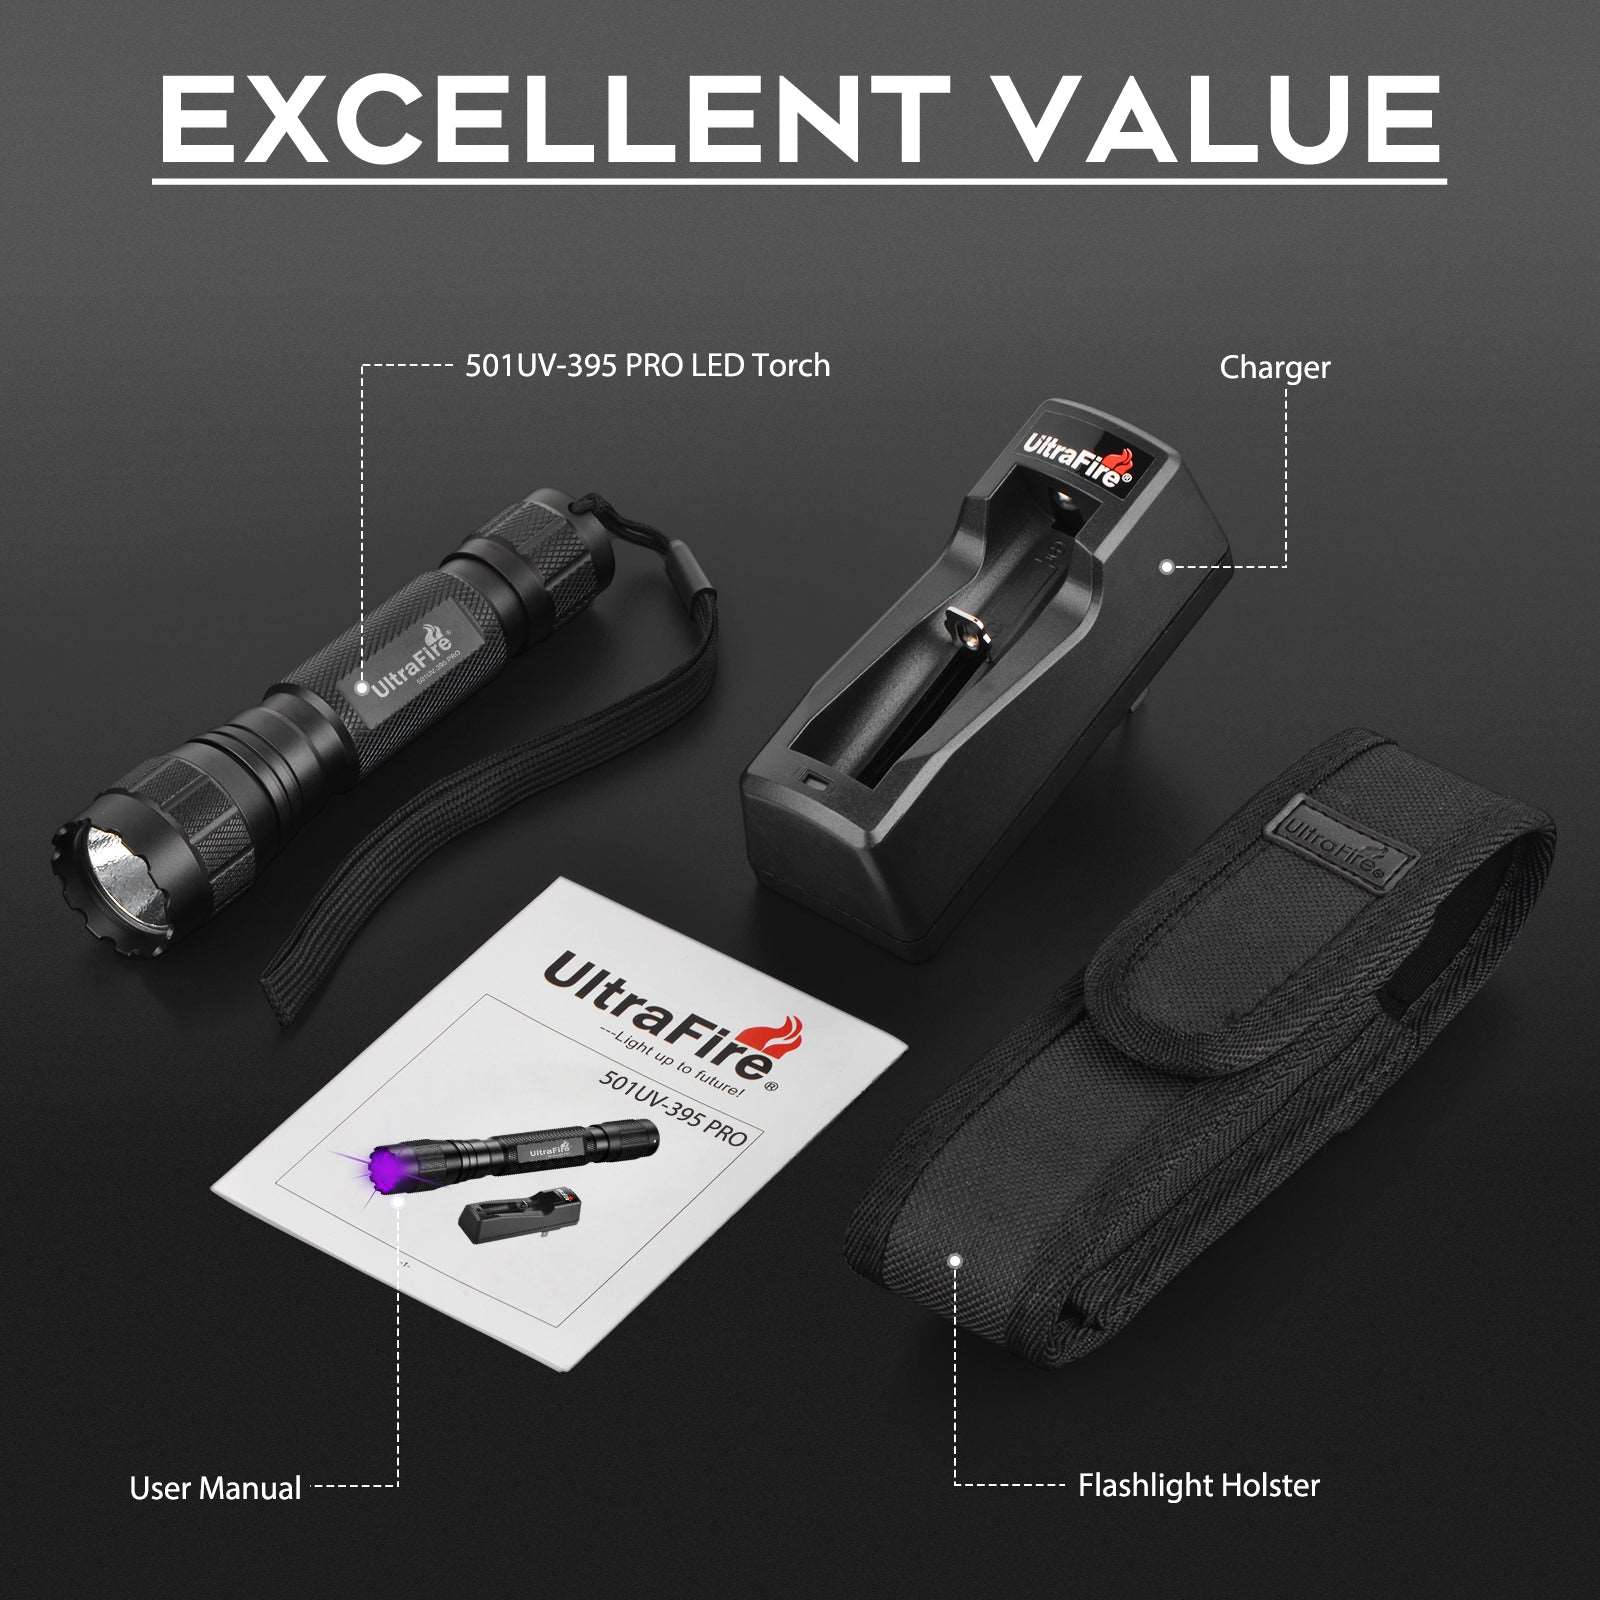 #Included_Package Flashlight